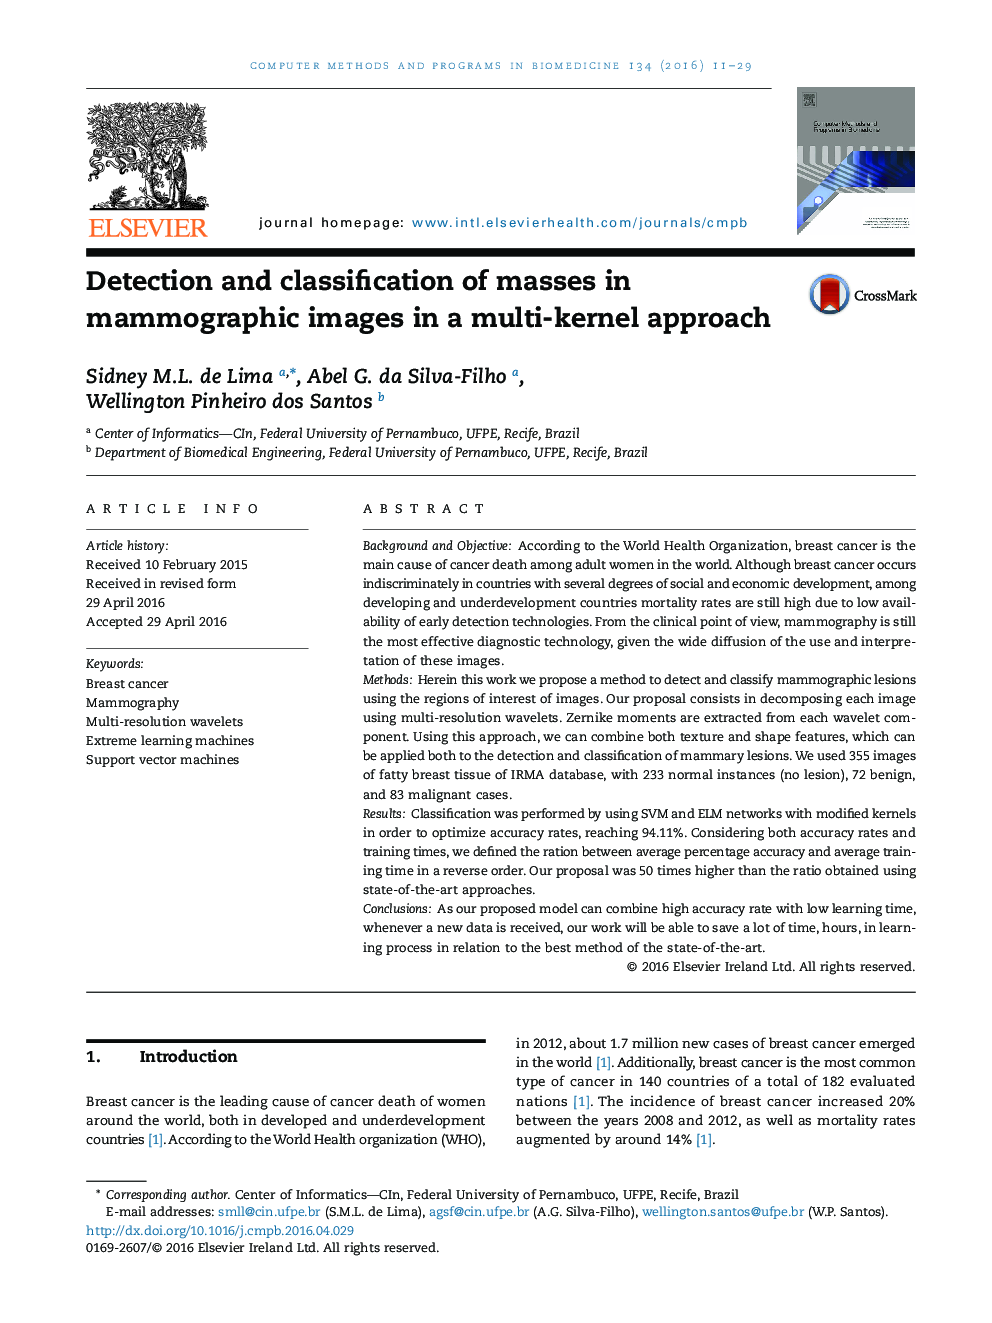 Detection and classification of masses in mammographic images in a multi-kernel approach